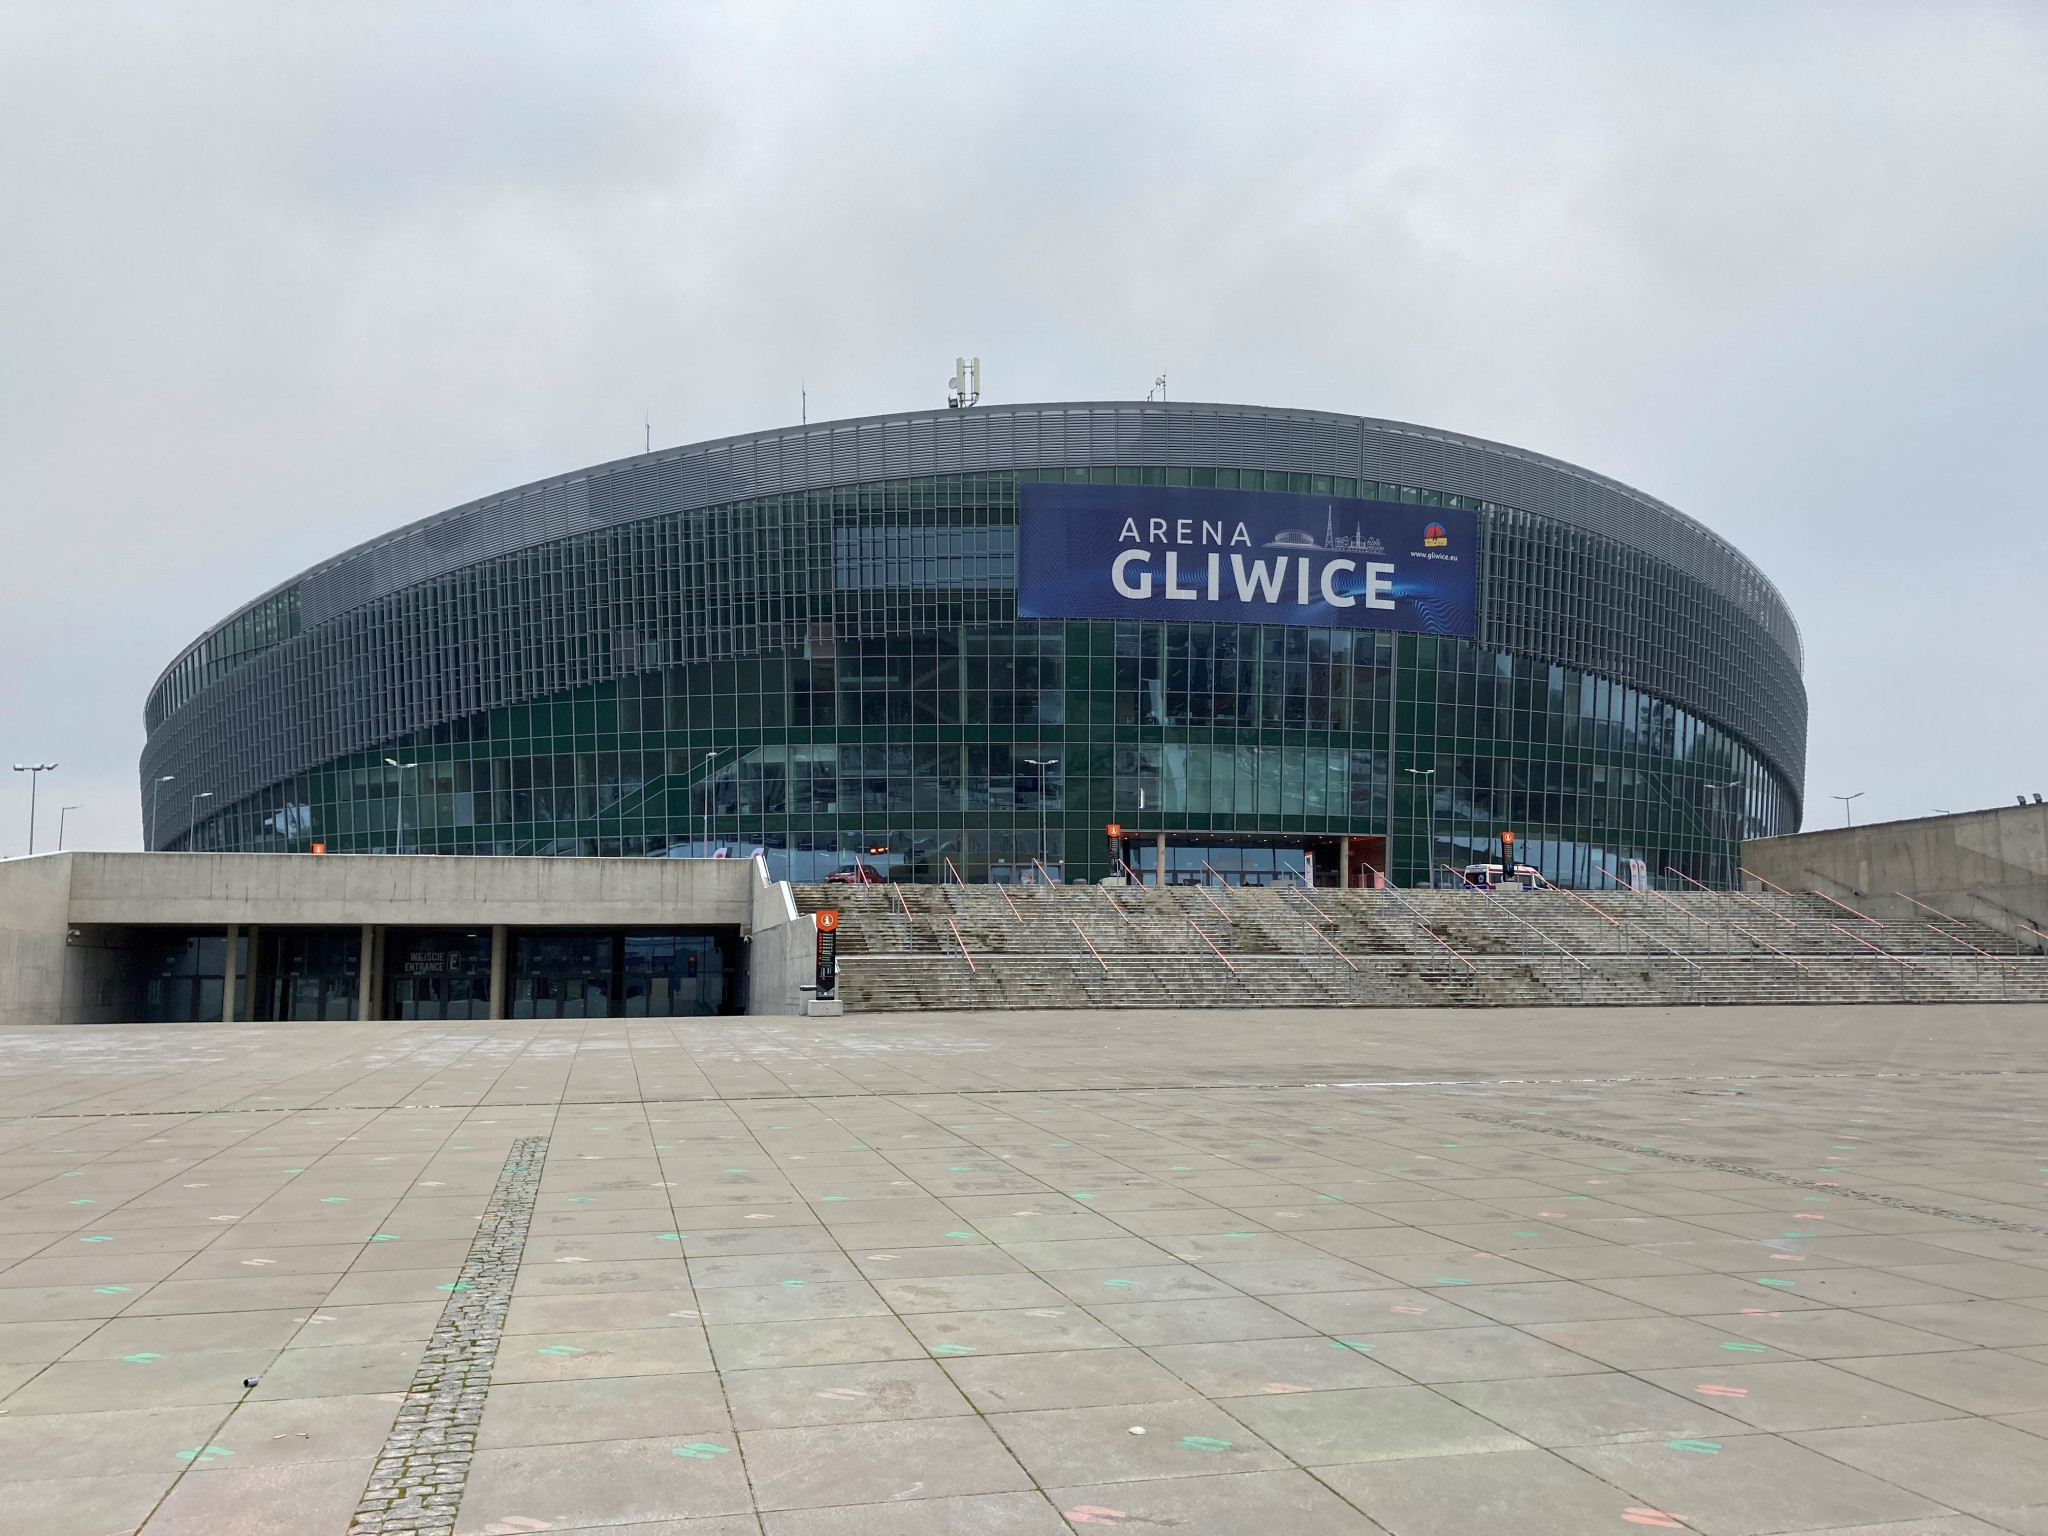 The Teqball World Championships are being held at the Gliwice Arena in Poland ©ITG